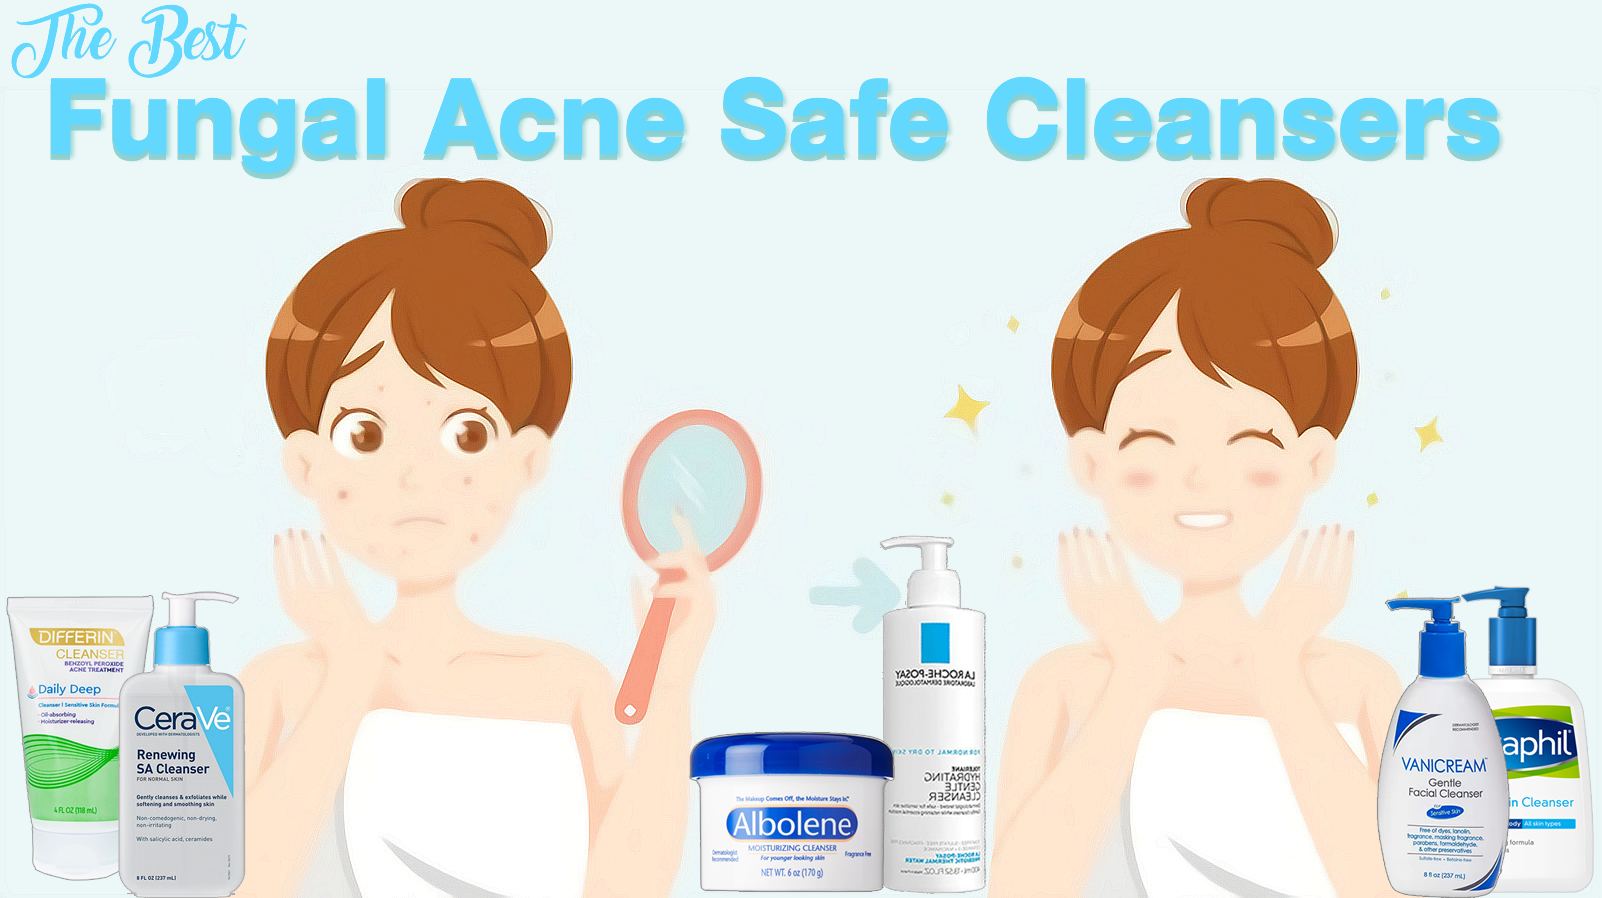 An Updated List Of The Best Fungal Acne Safe Cleansers